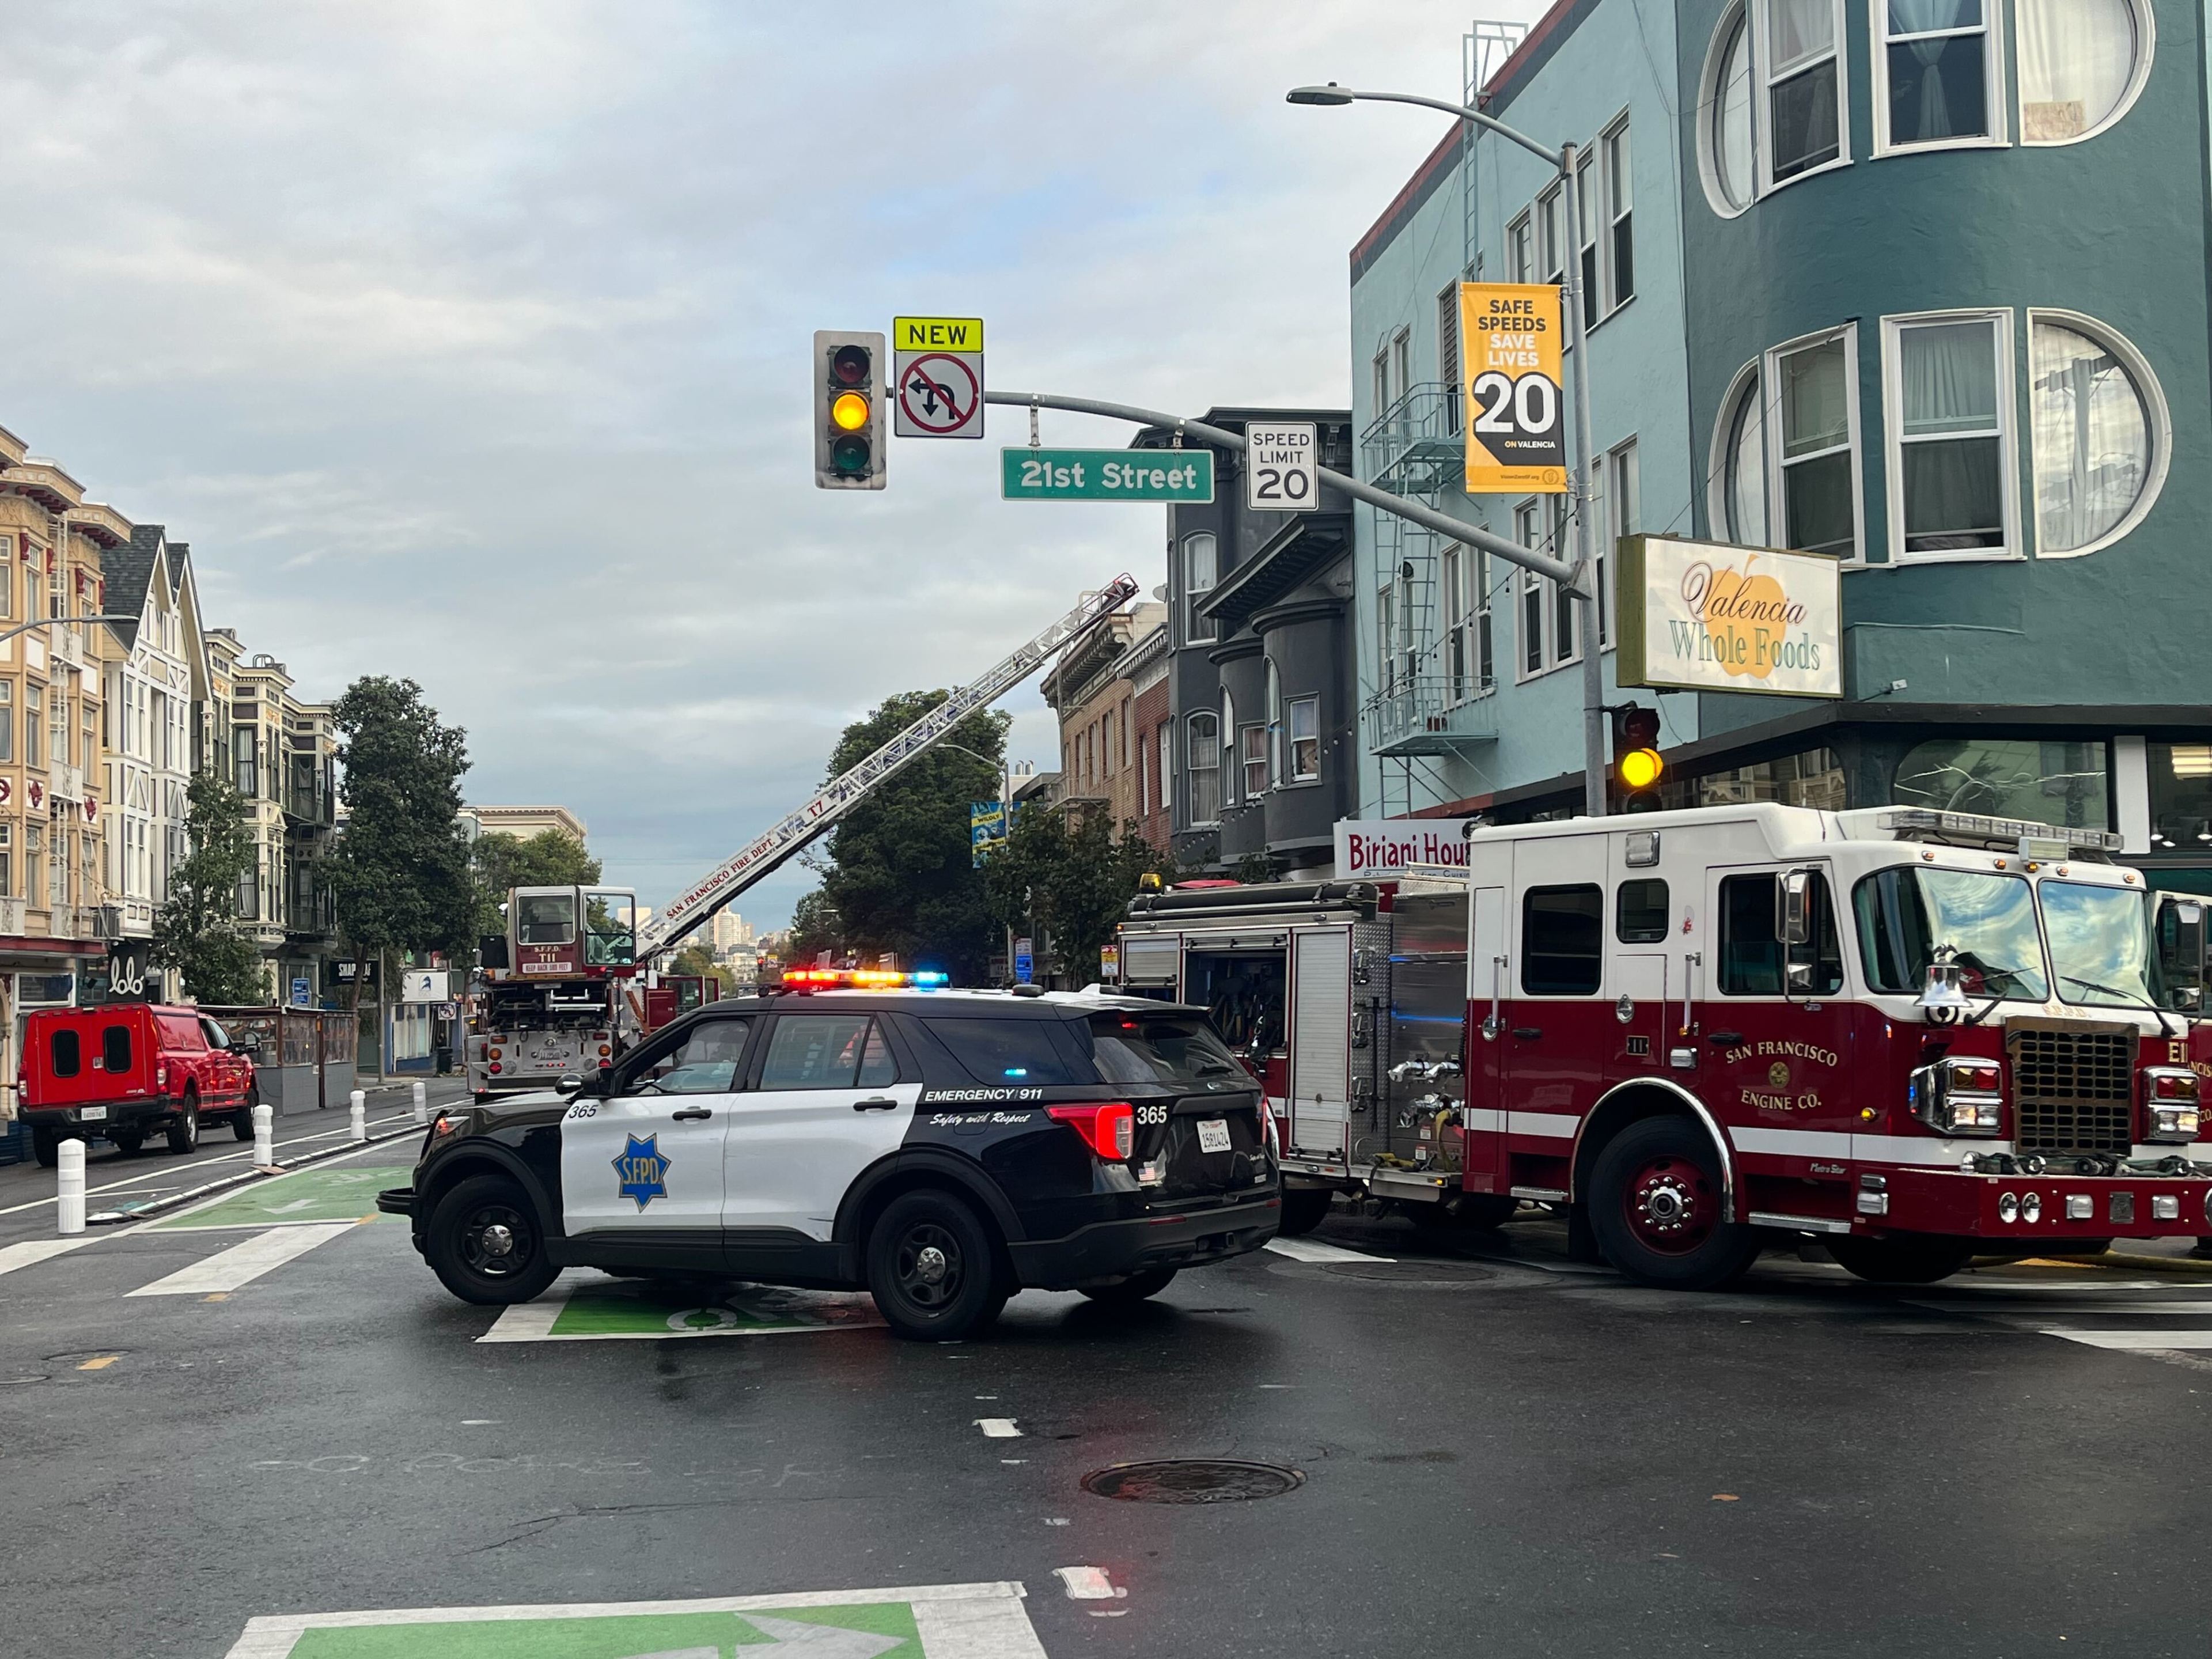 A police sport-utility vehicle blocks traffic at an intersection while a fire engine and hook and ladder truck work to contain a fire.